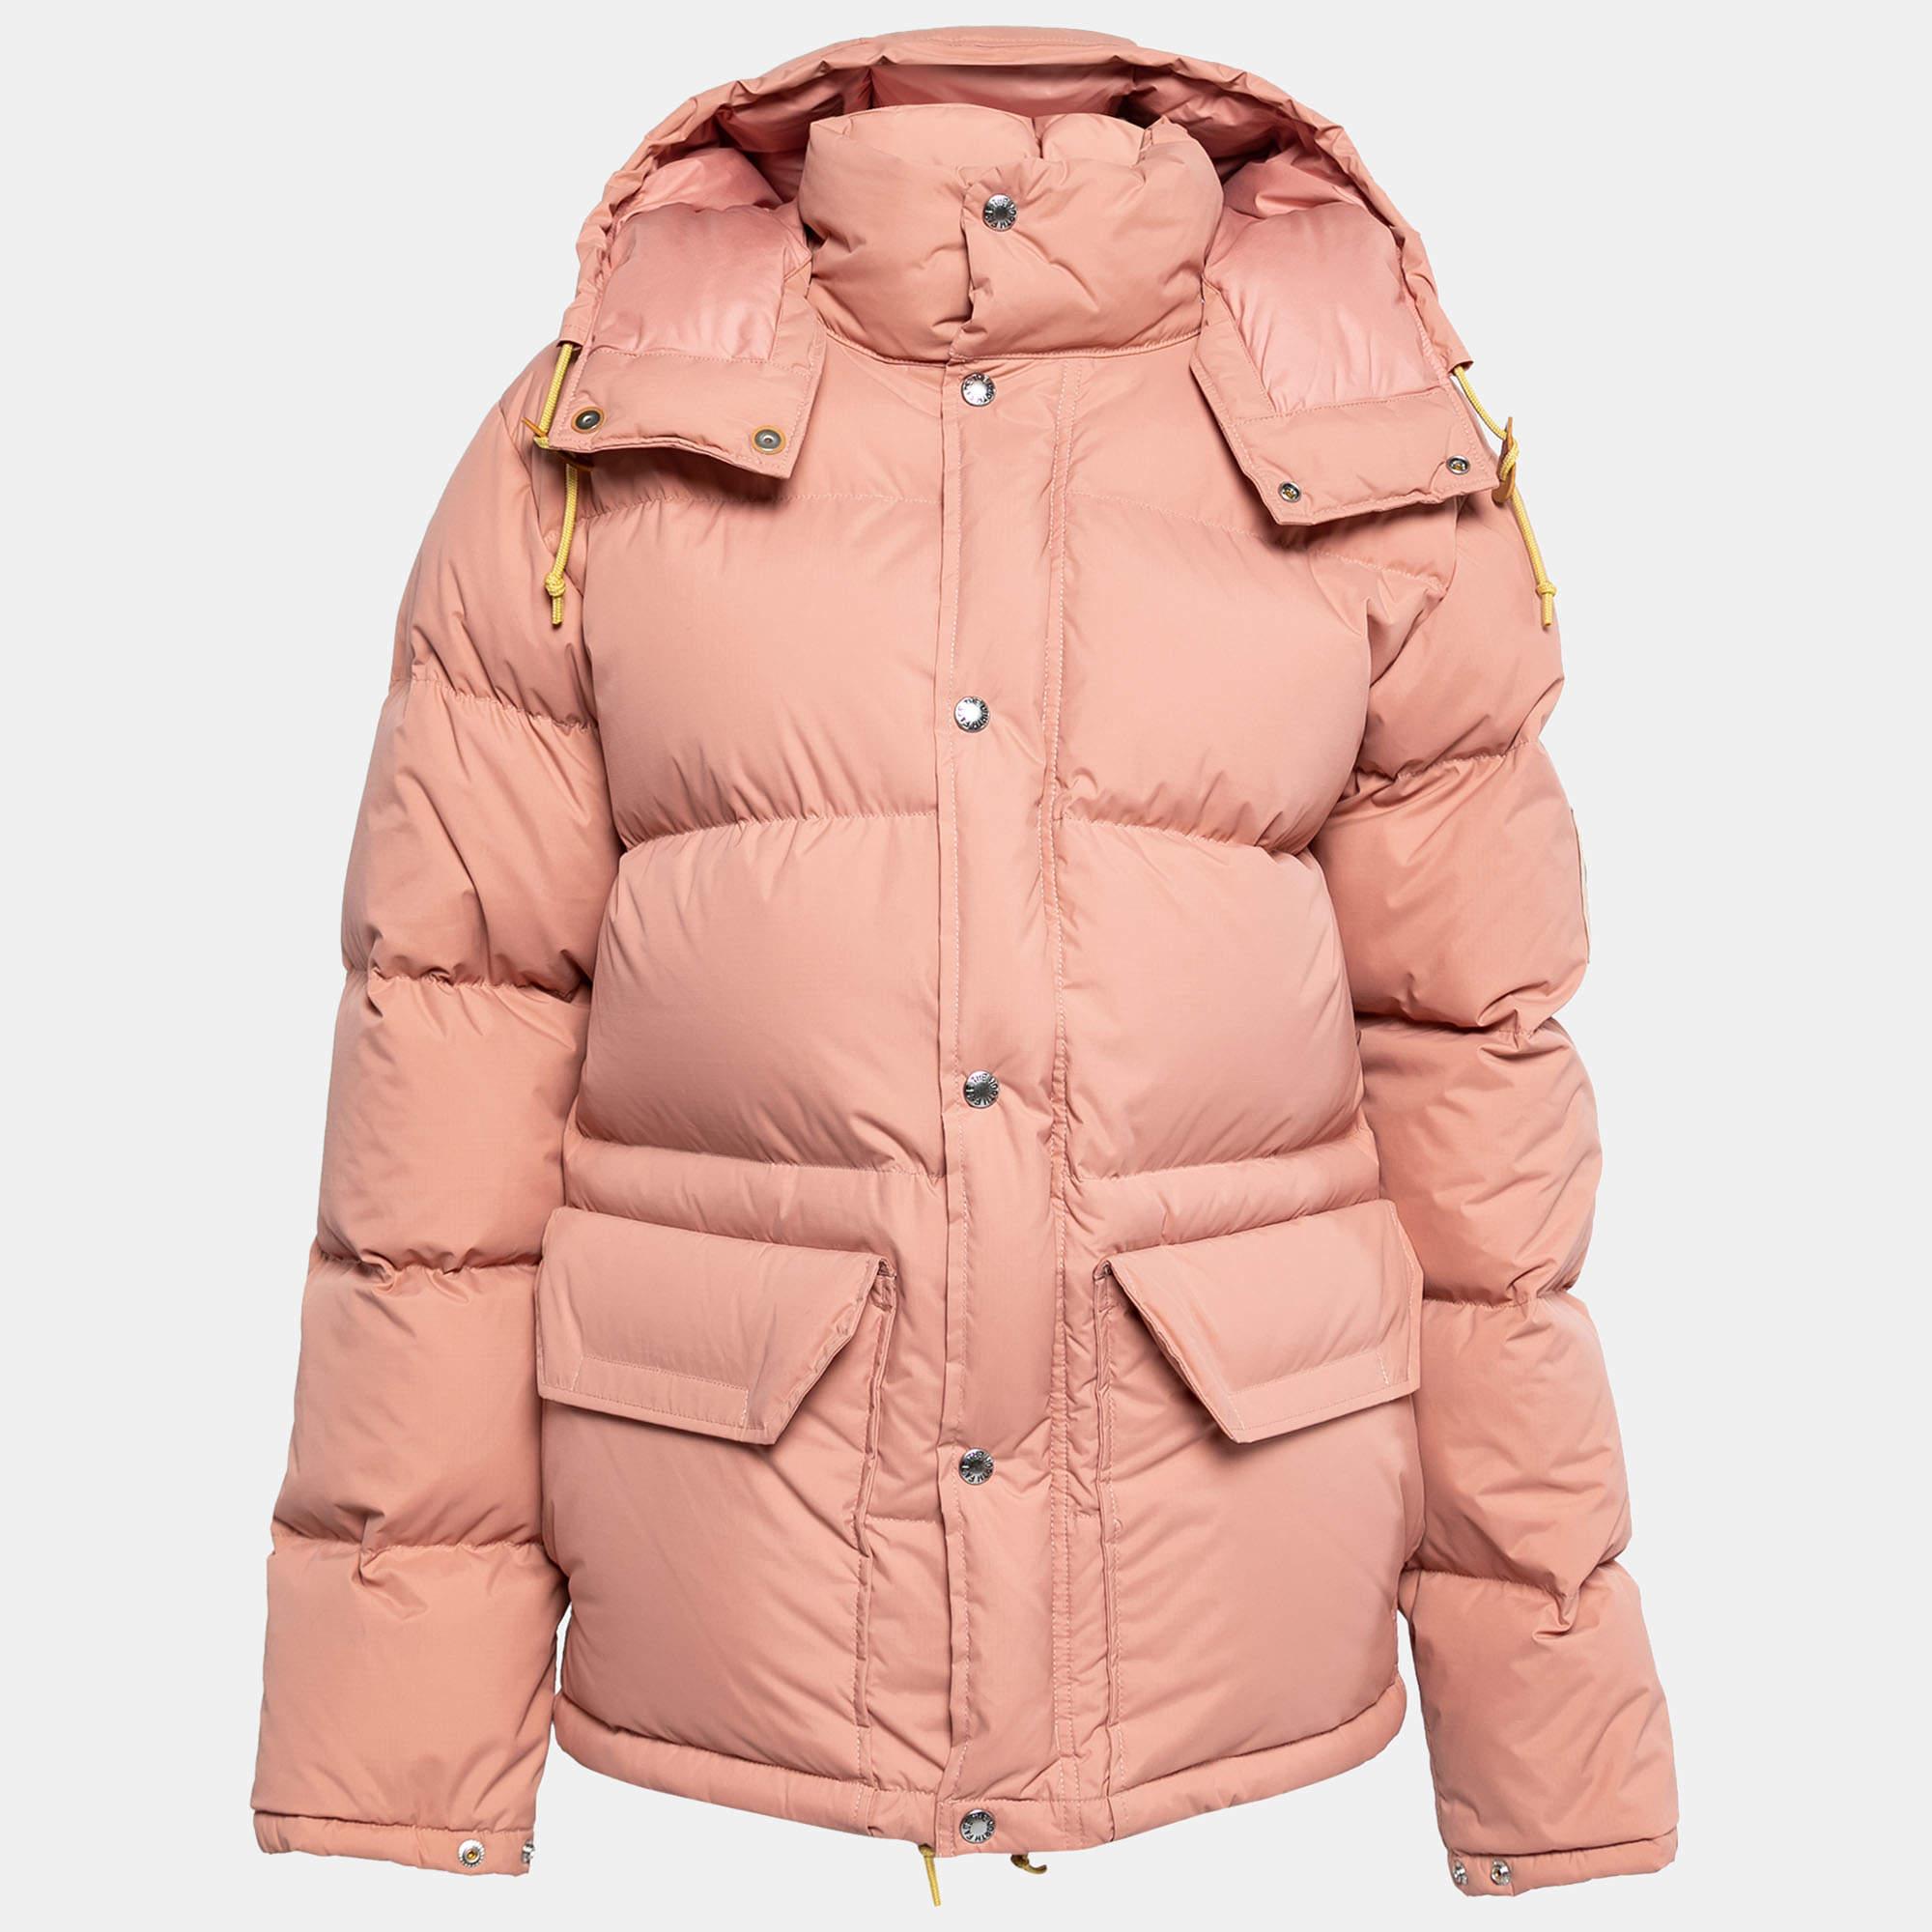 North Face X Gucci Light Pink Down Jacket S For Sale 1